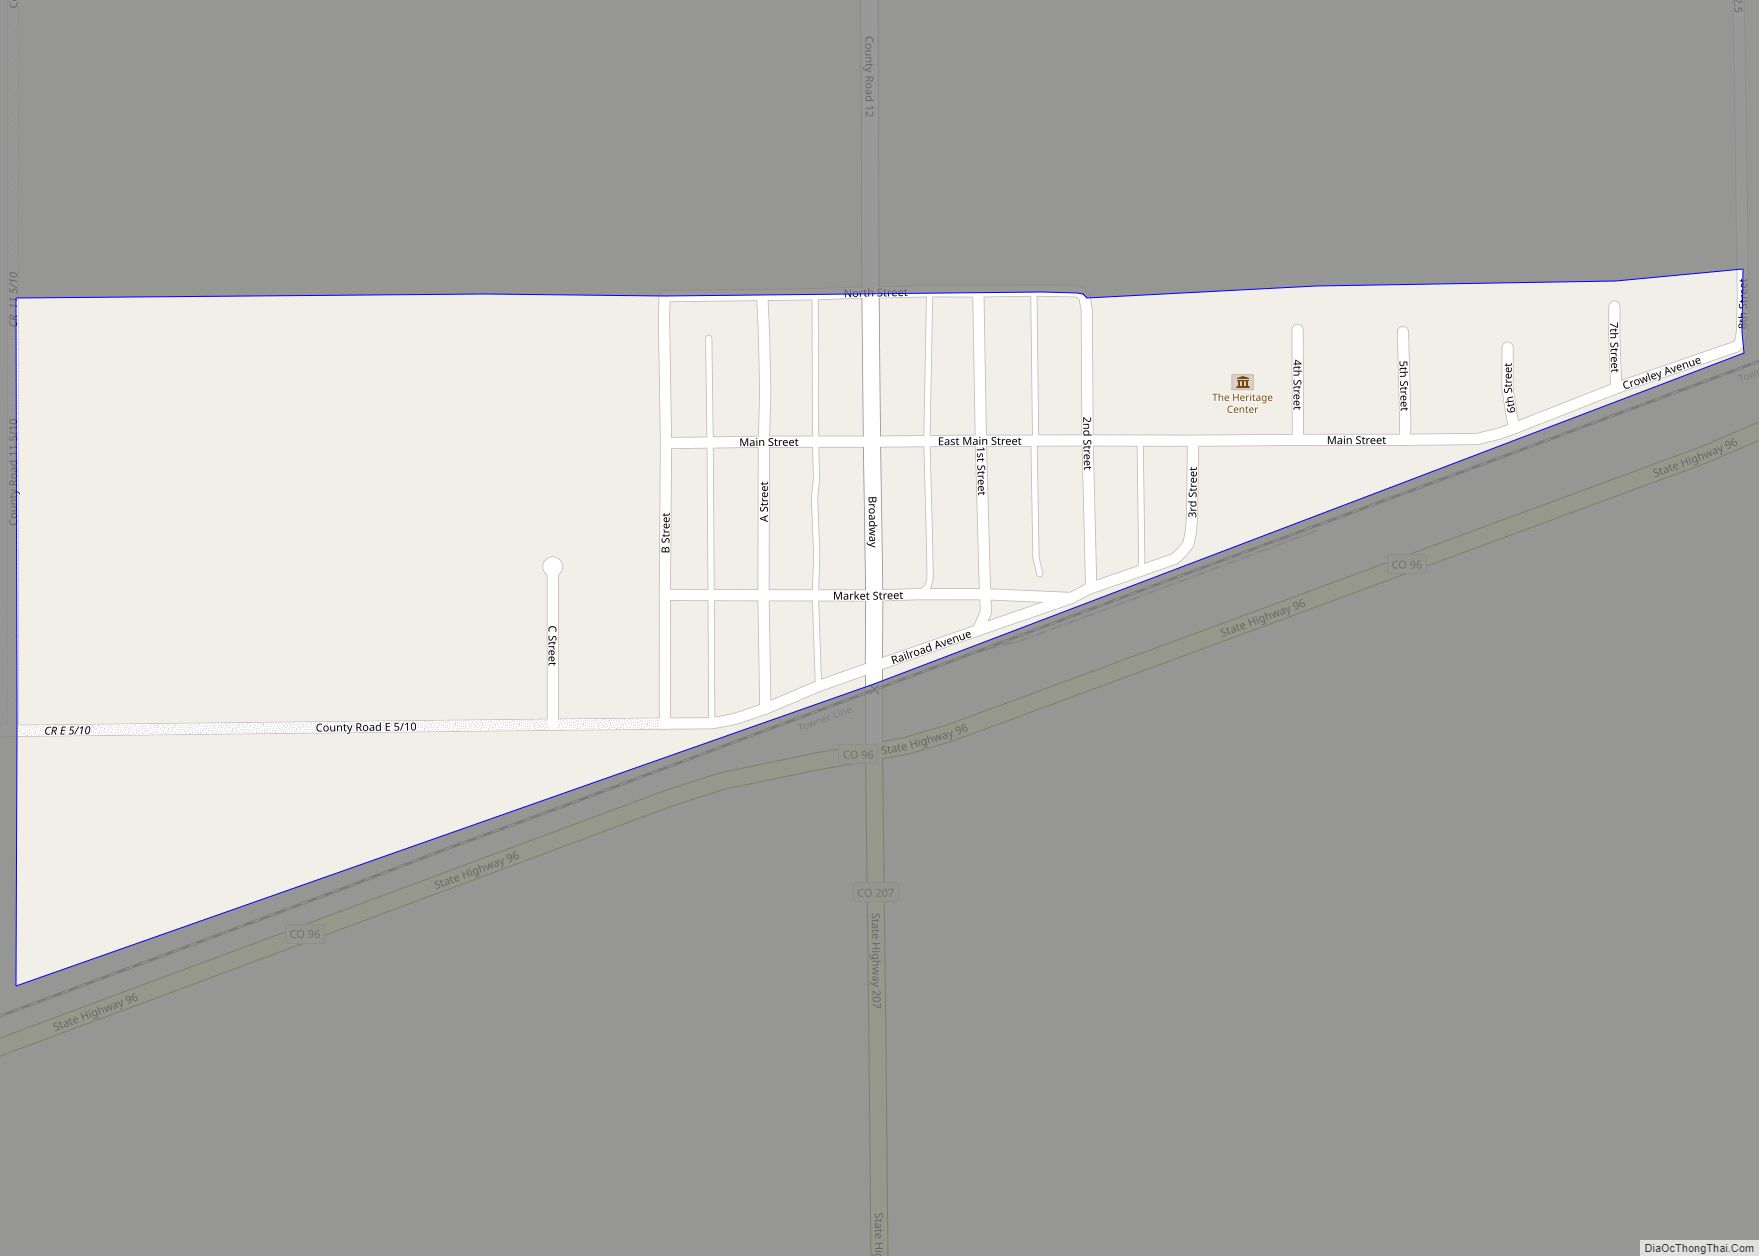 Map of Crowley town